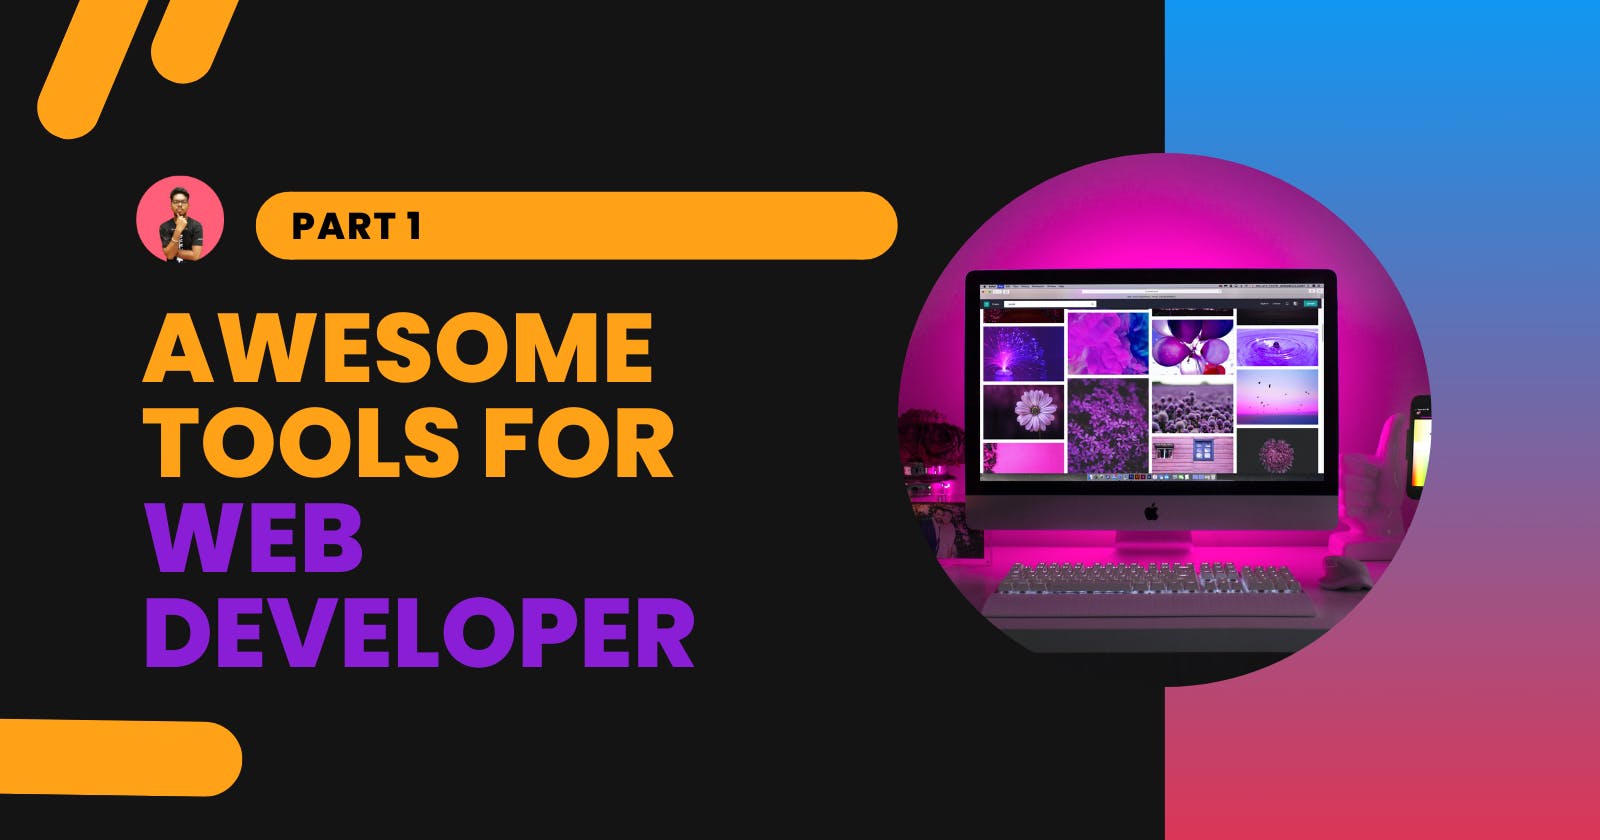 Awesome tools for Web Developer - Part 1